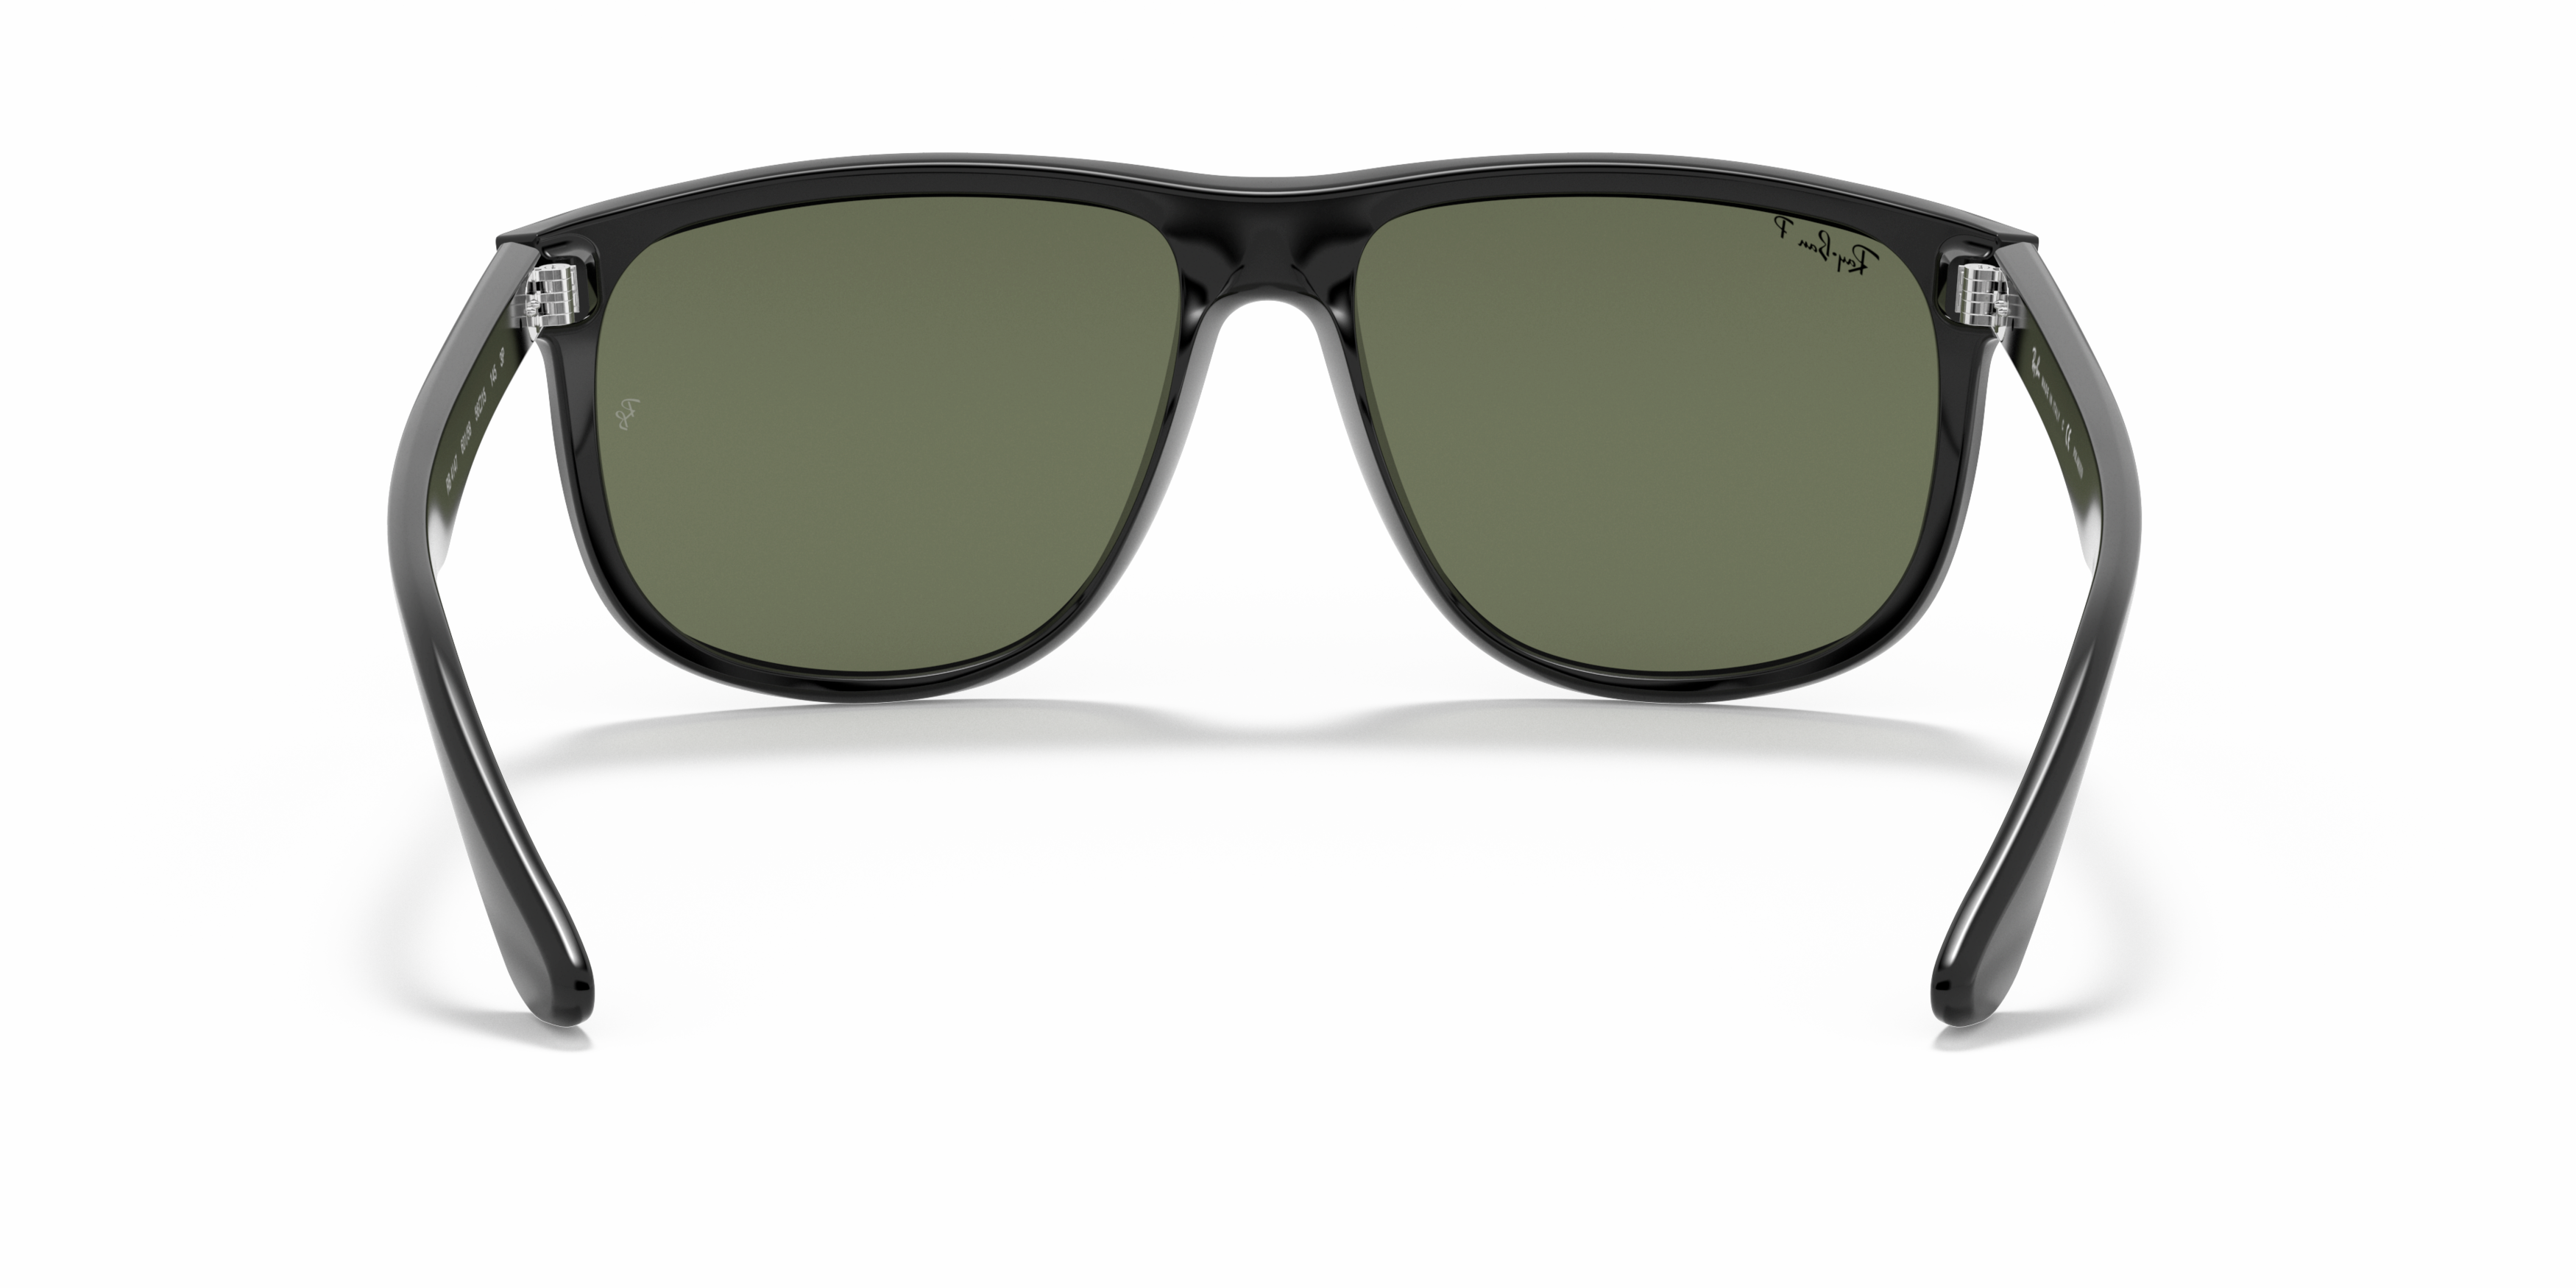 [products.image.detail02] Ray-Ban 0RB4147 601/58